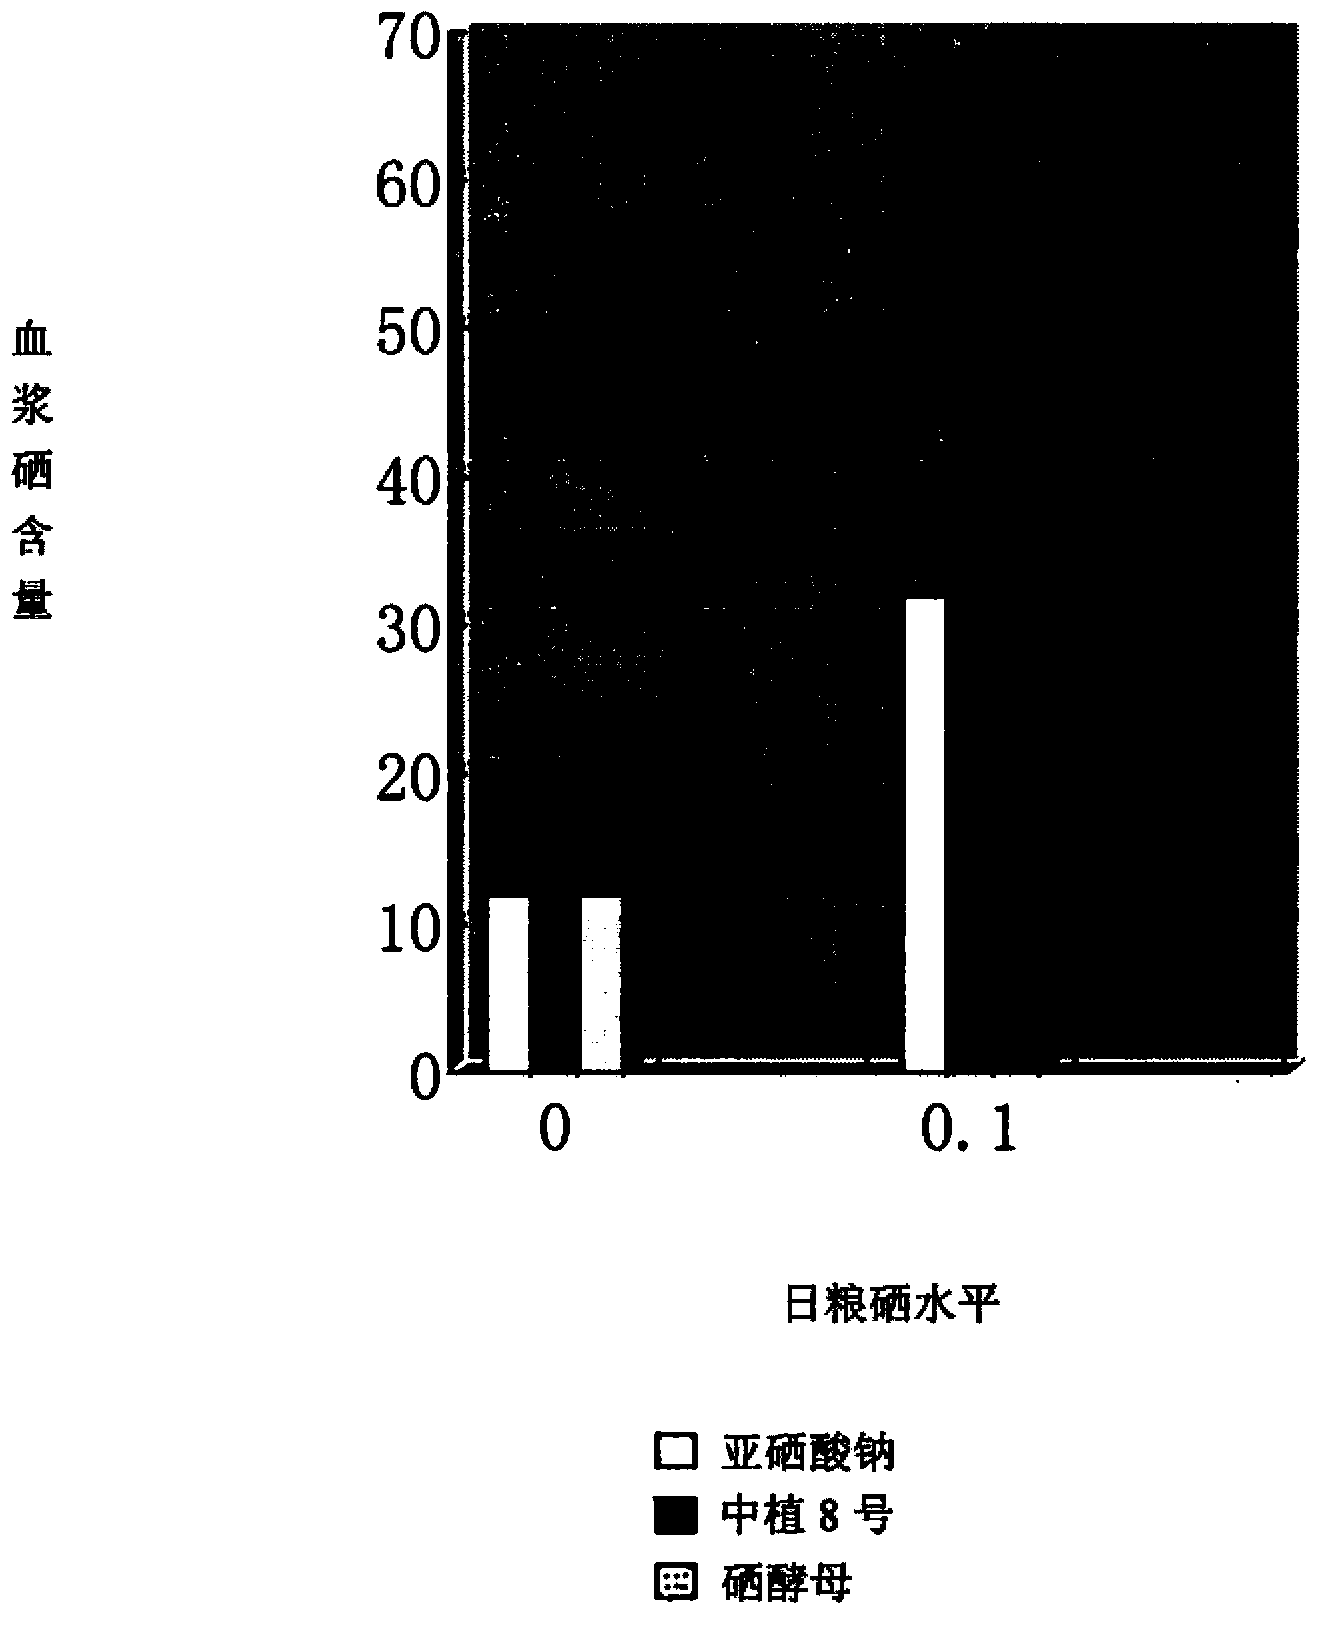 Compound silkworm pupa hypoglycemic health-care medicinal composition as well as preparation method and application thereof